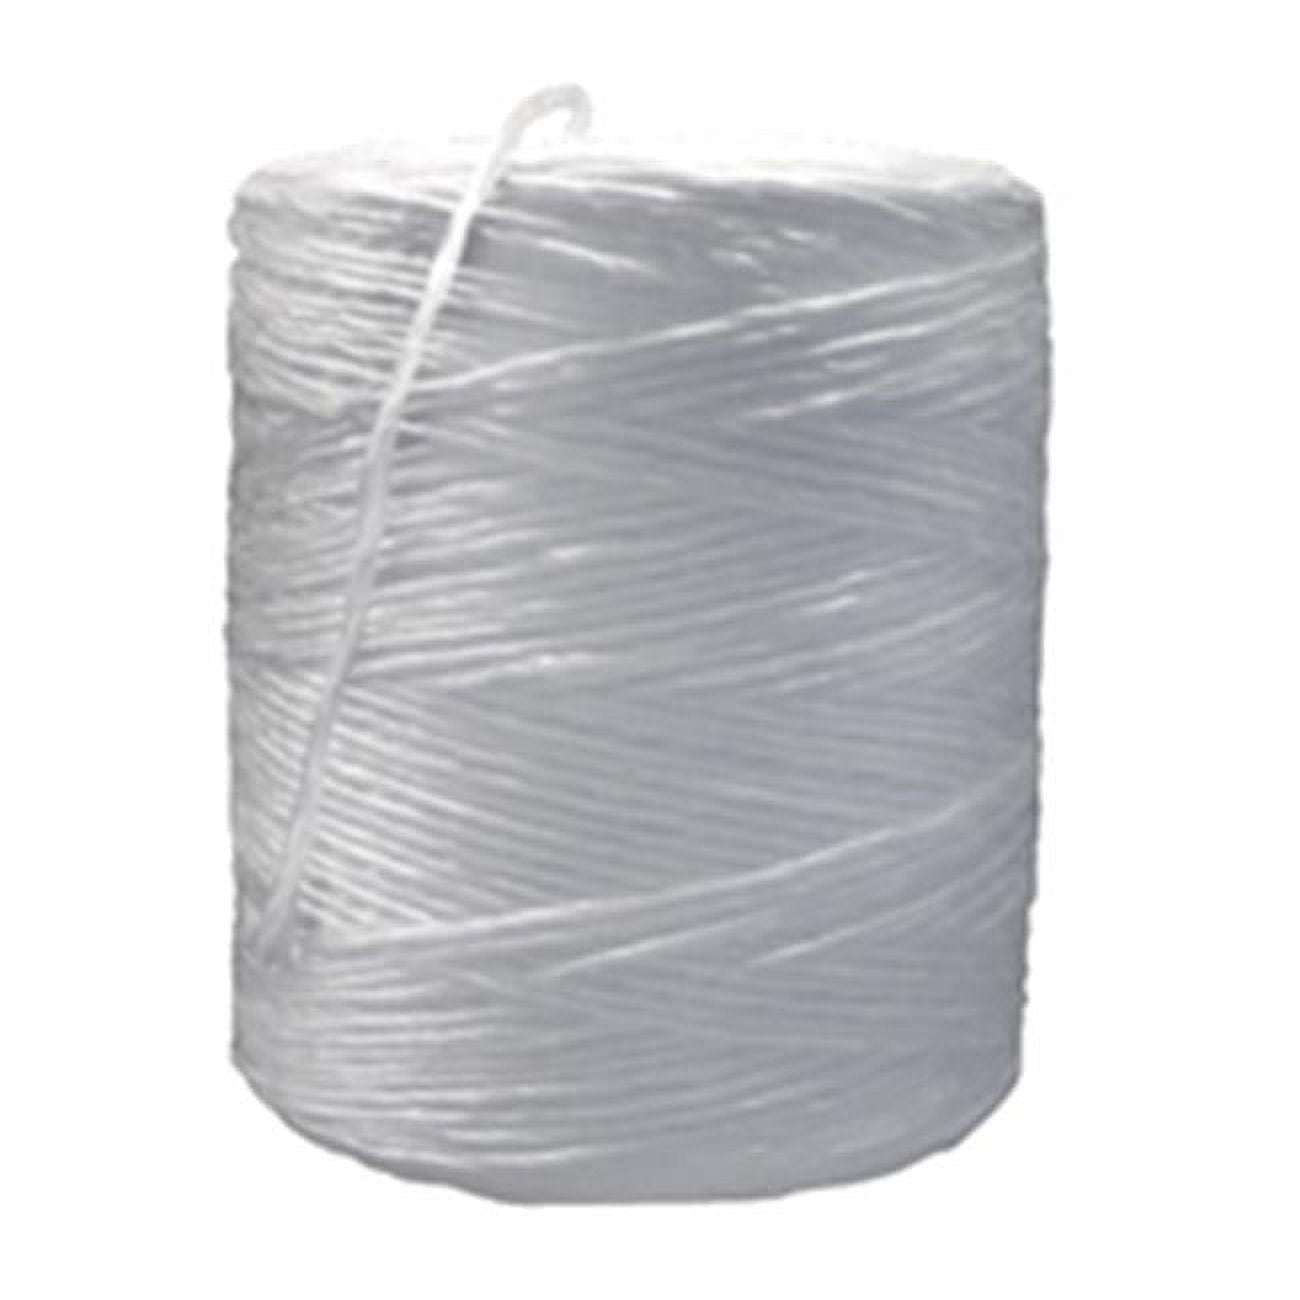 Picture of Box Partners TWT180 3-Ply 725 lbs, White Polypropylene Tying Twine